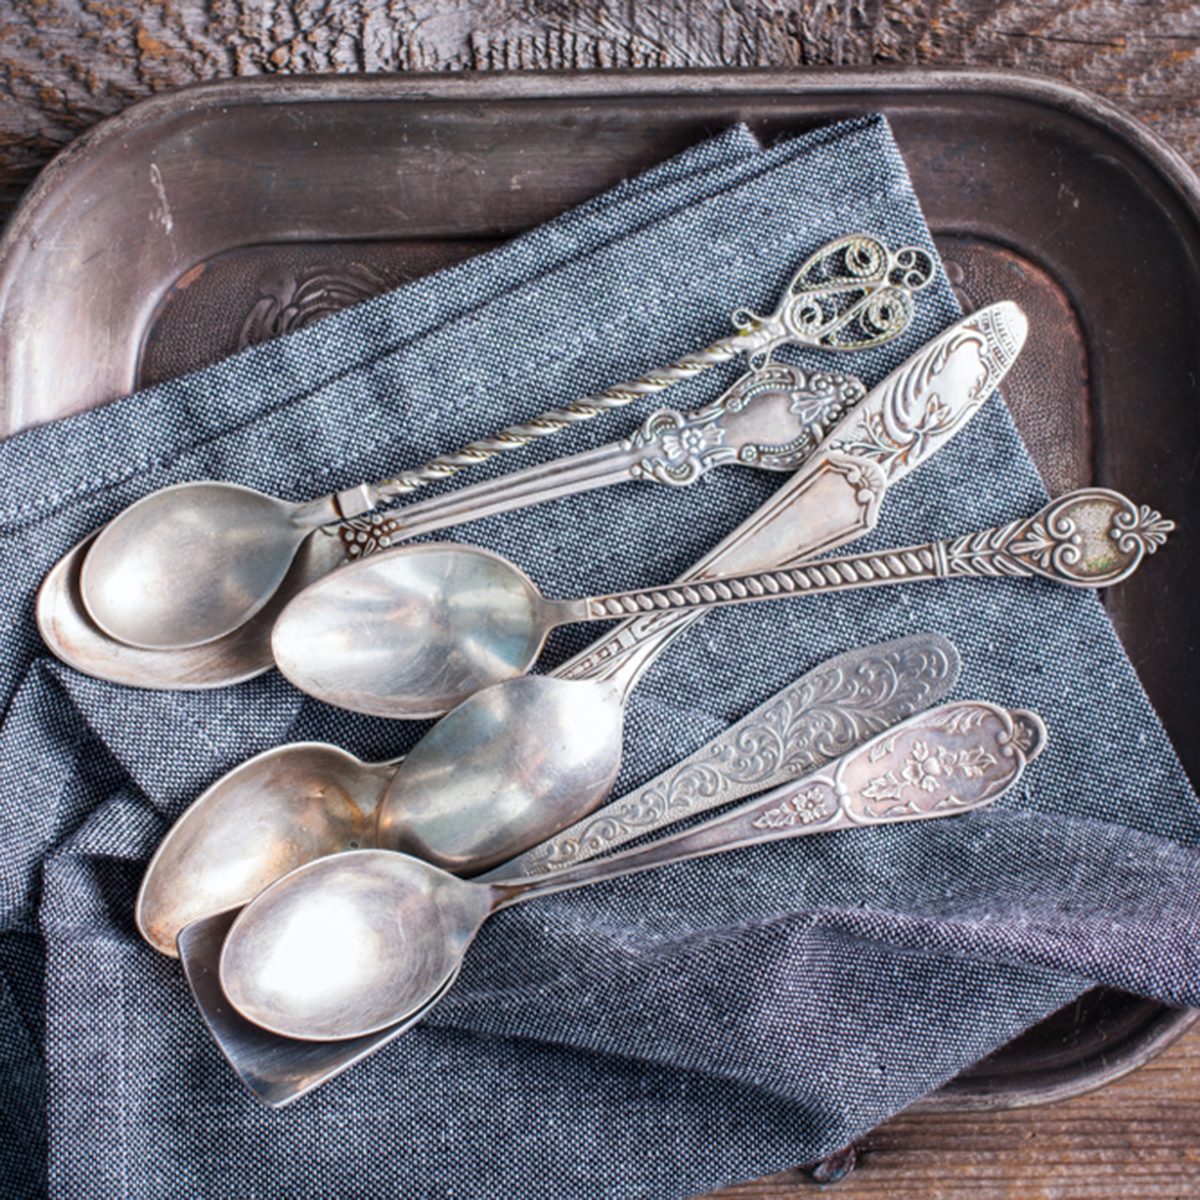 colors  How to clean silver, Tarnished silverware, How to clean